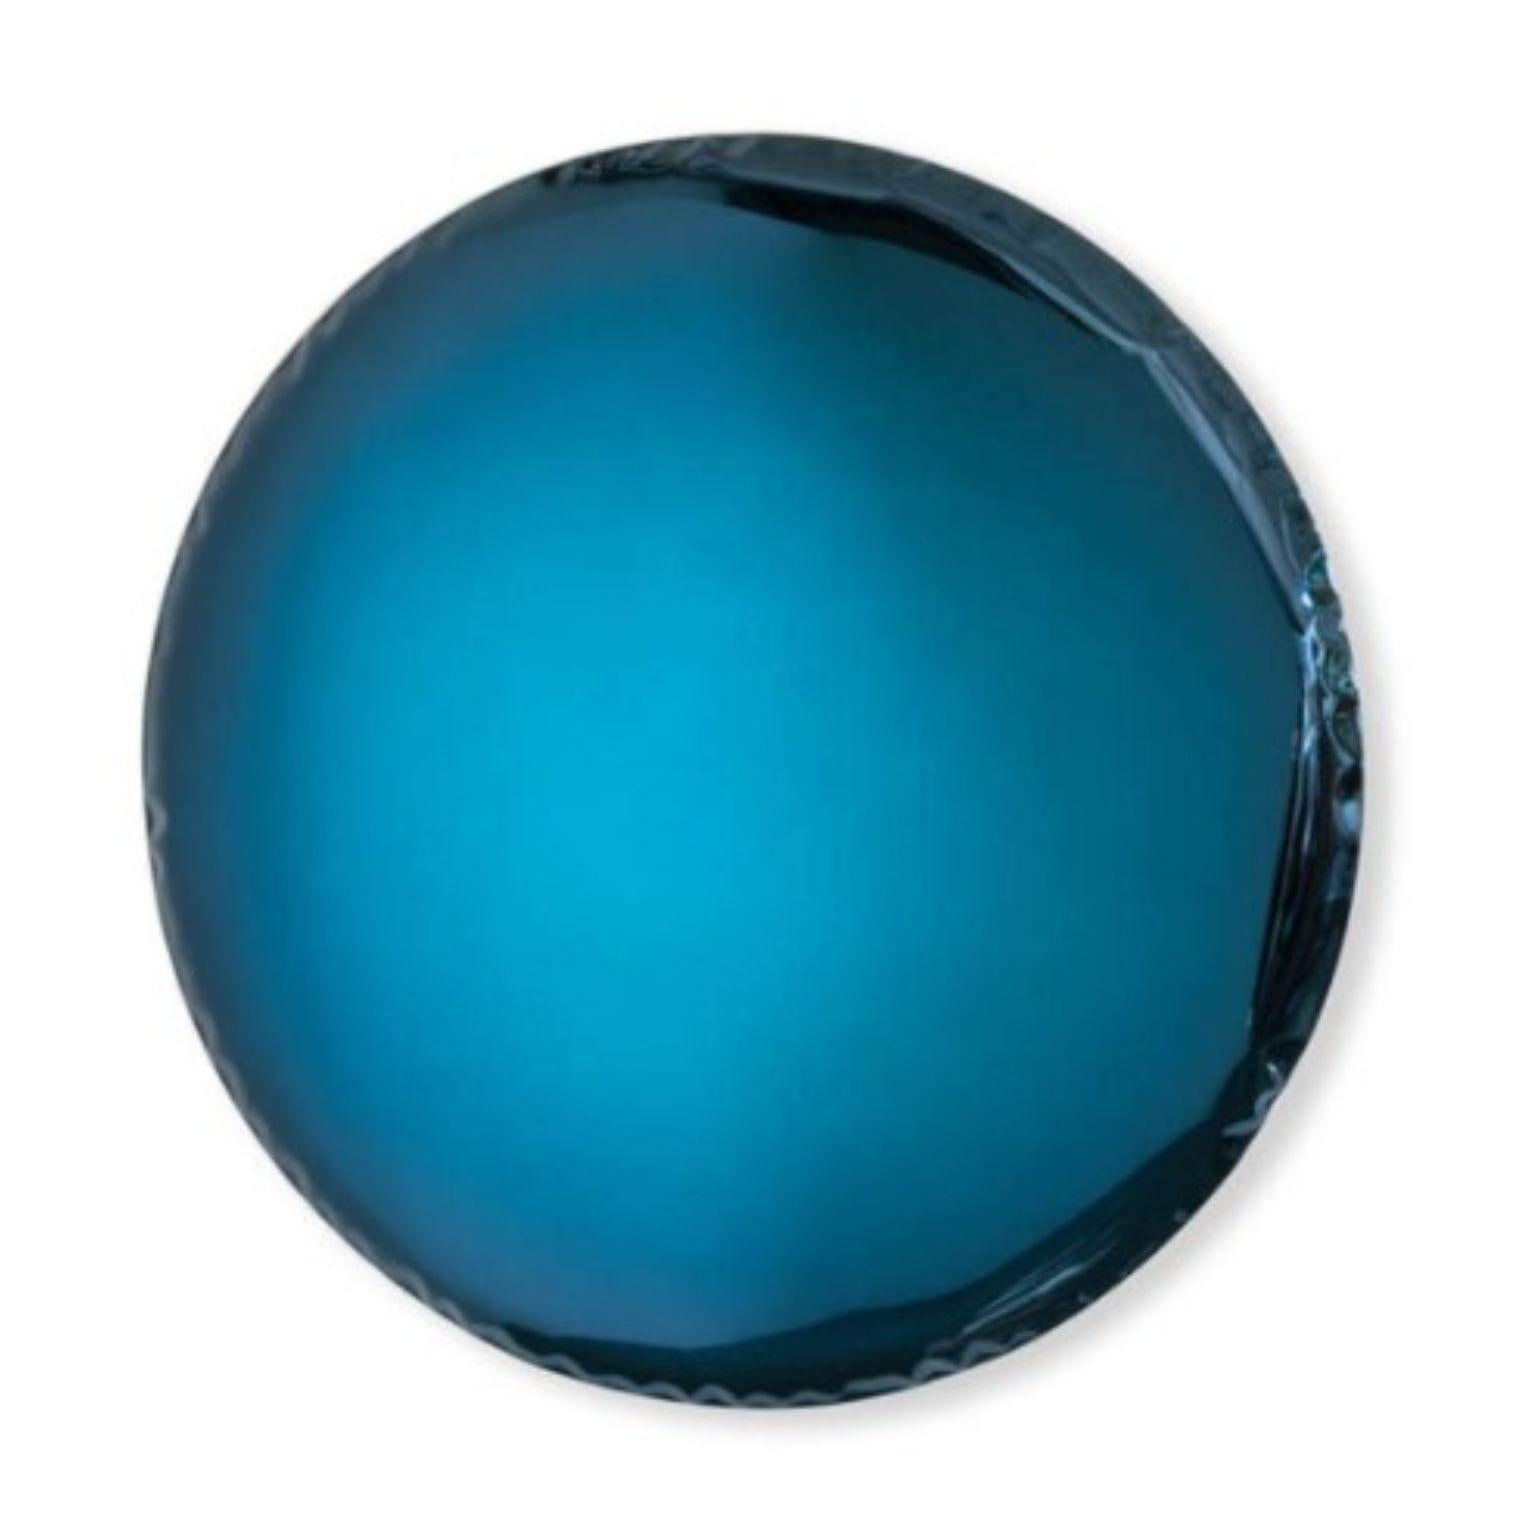 Deep space blue Oko 120 sculptural wall mirror by Zieta
Dimensions: Diameter 120 x D 6 cm 
Material: Stainless steel. 
Finish: Deep Space Blue.
Available in finishes: Stainless Steel, Deep Space Blue, Emerald, Saphire, Saphire/Emerald, Dark Matter,